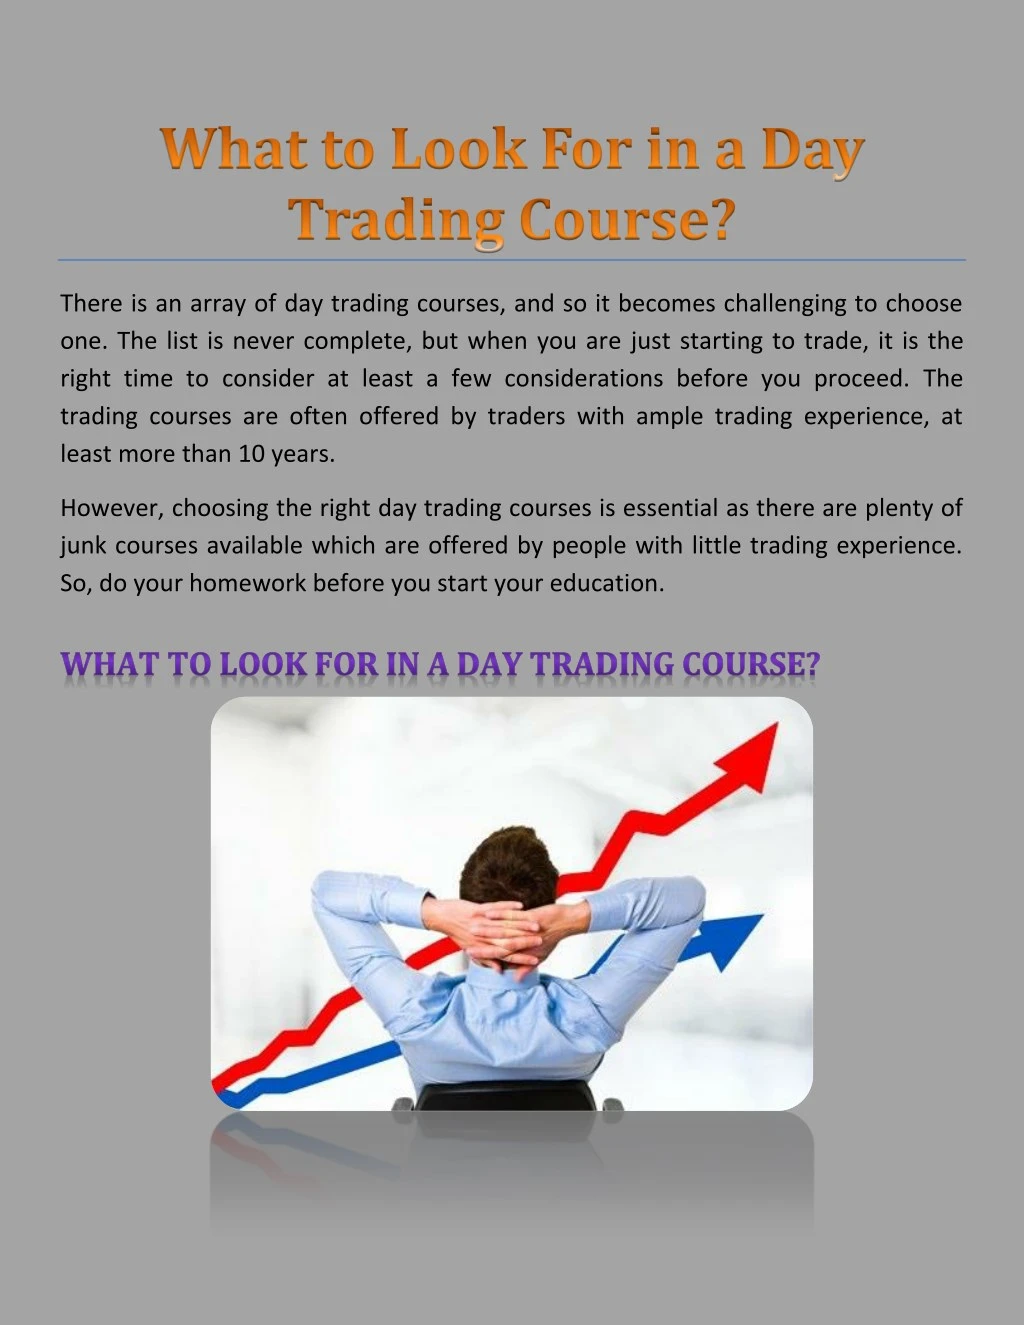 there is an array of day trading courses